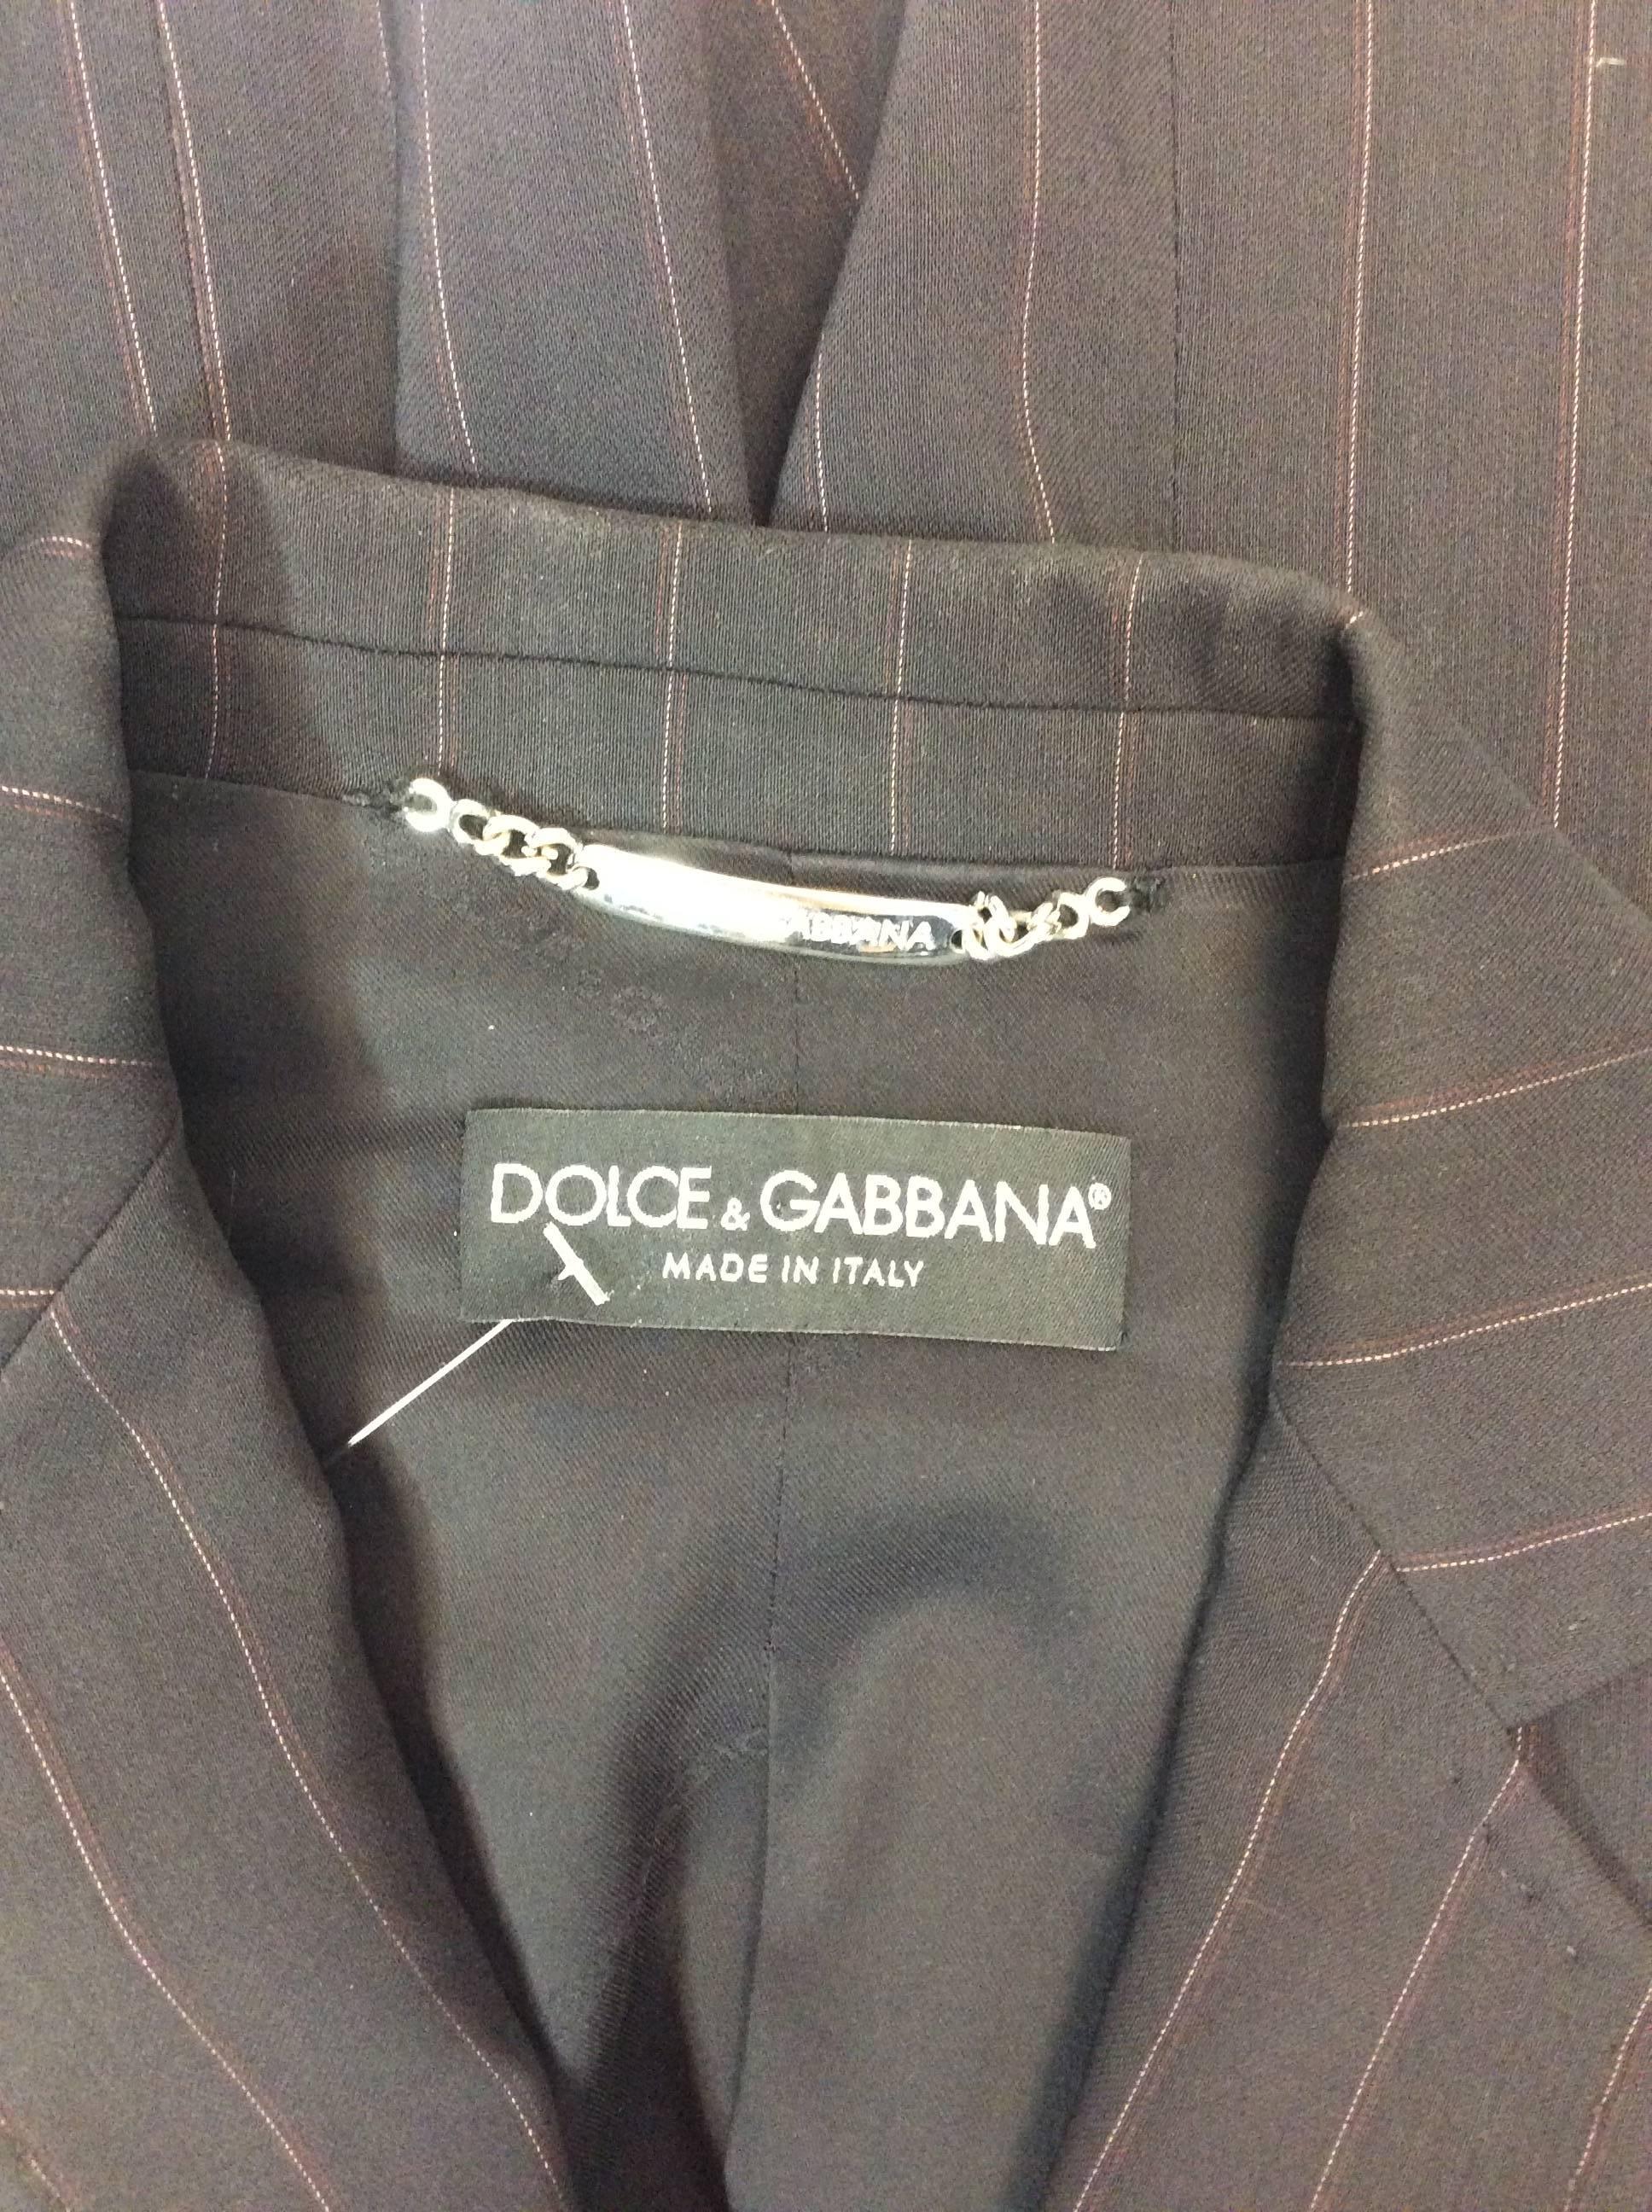 Dolce & Gabbana Black Pantsuit with Red Toned Pinstripes For Sale 3